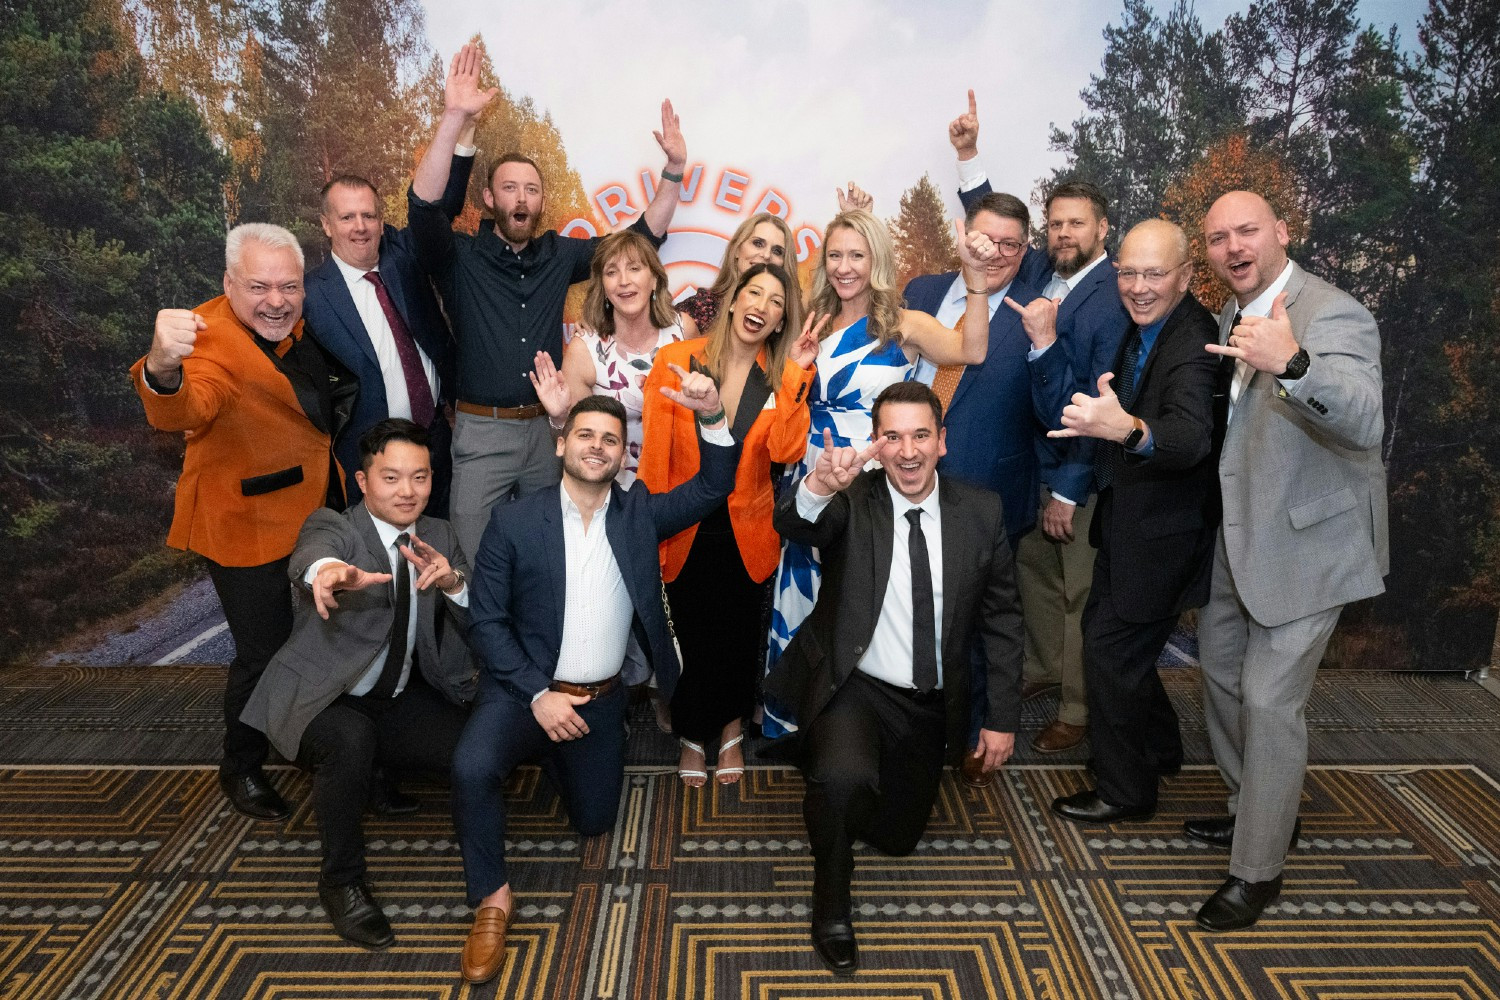 Sales Superstars Unite! Energizing Moments and Big Wins at our National Sales Meeting 